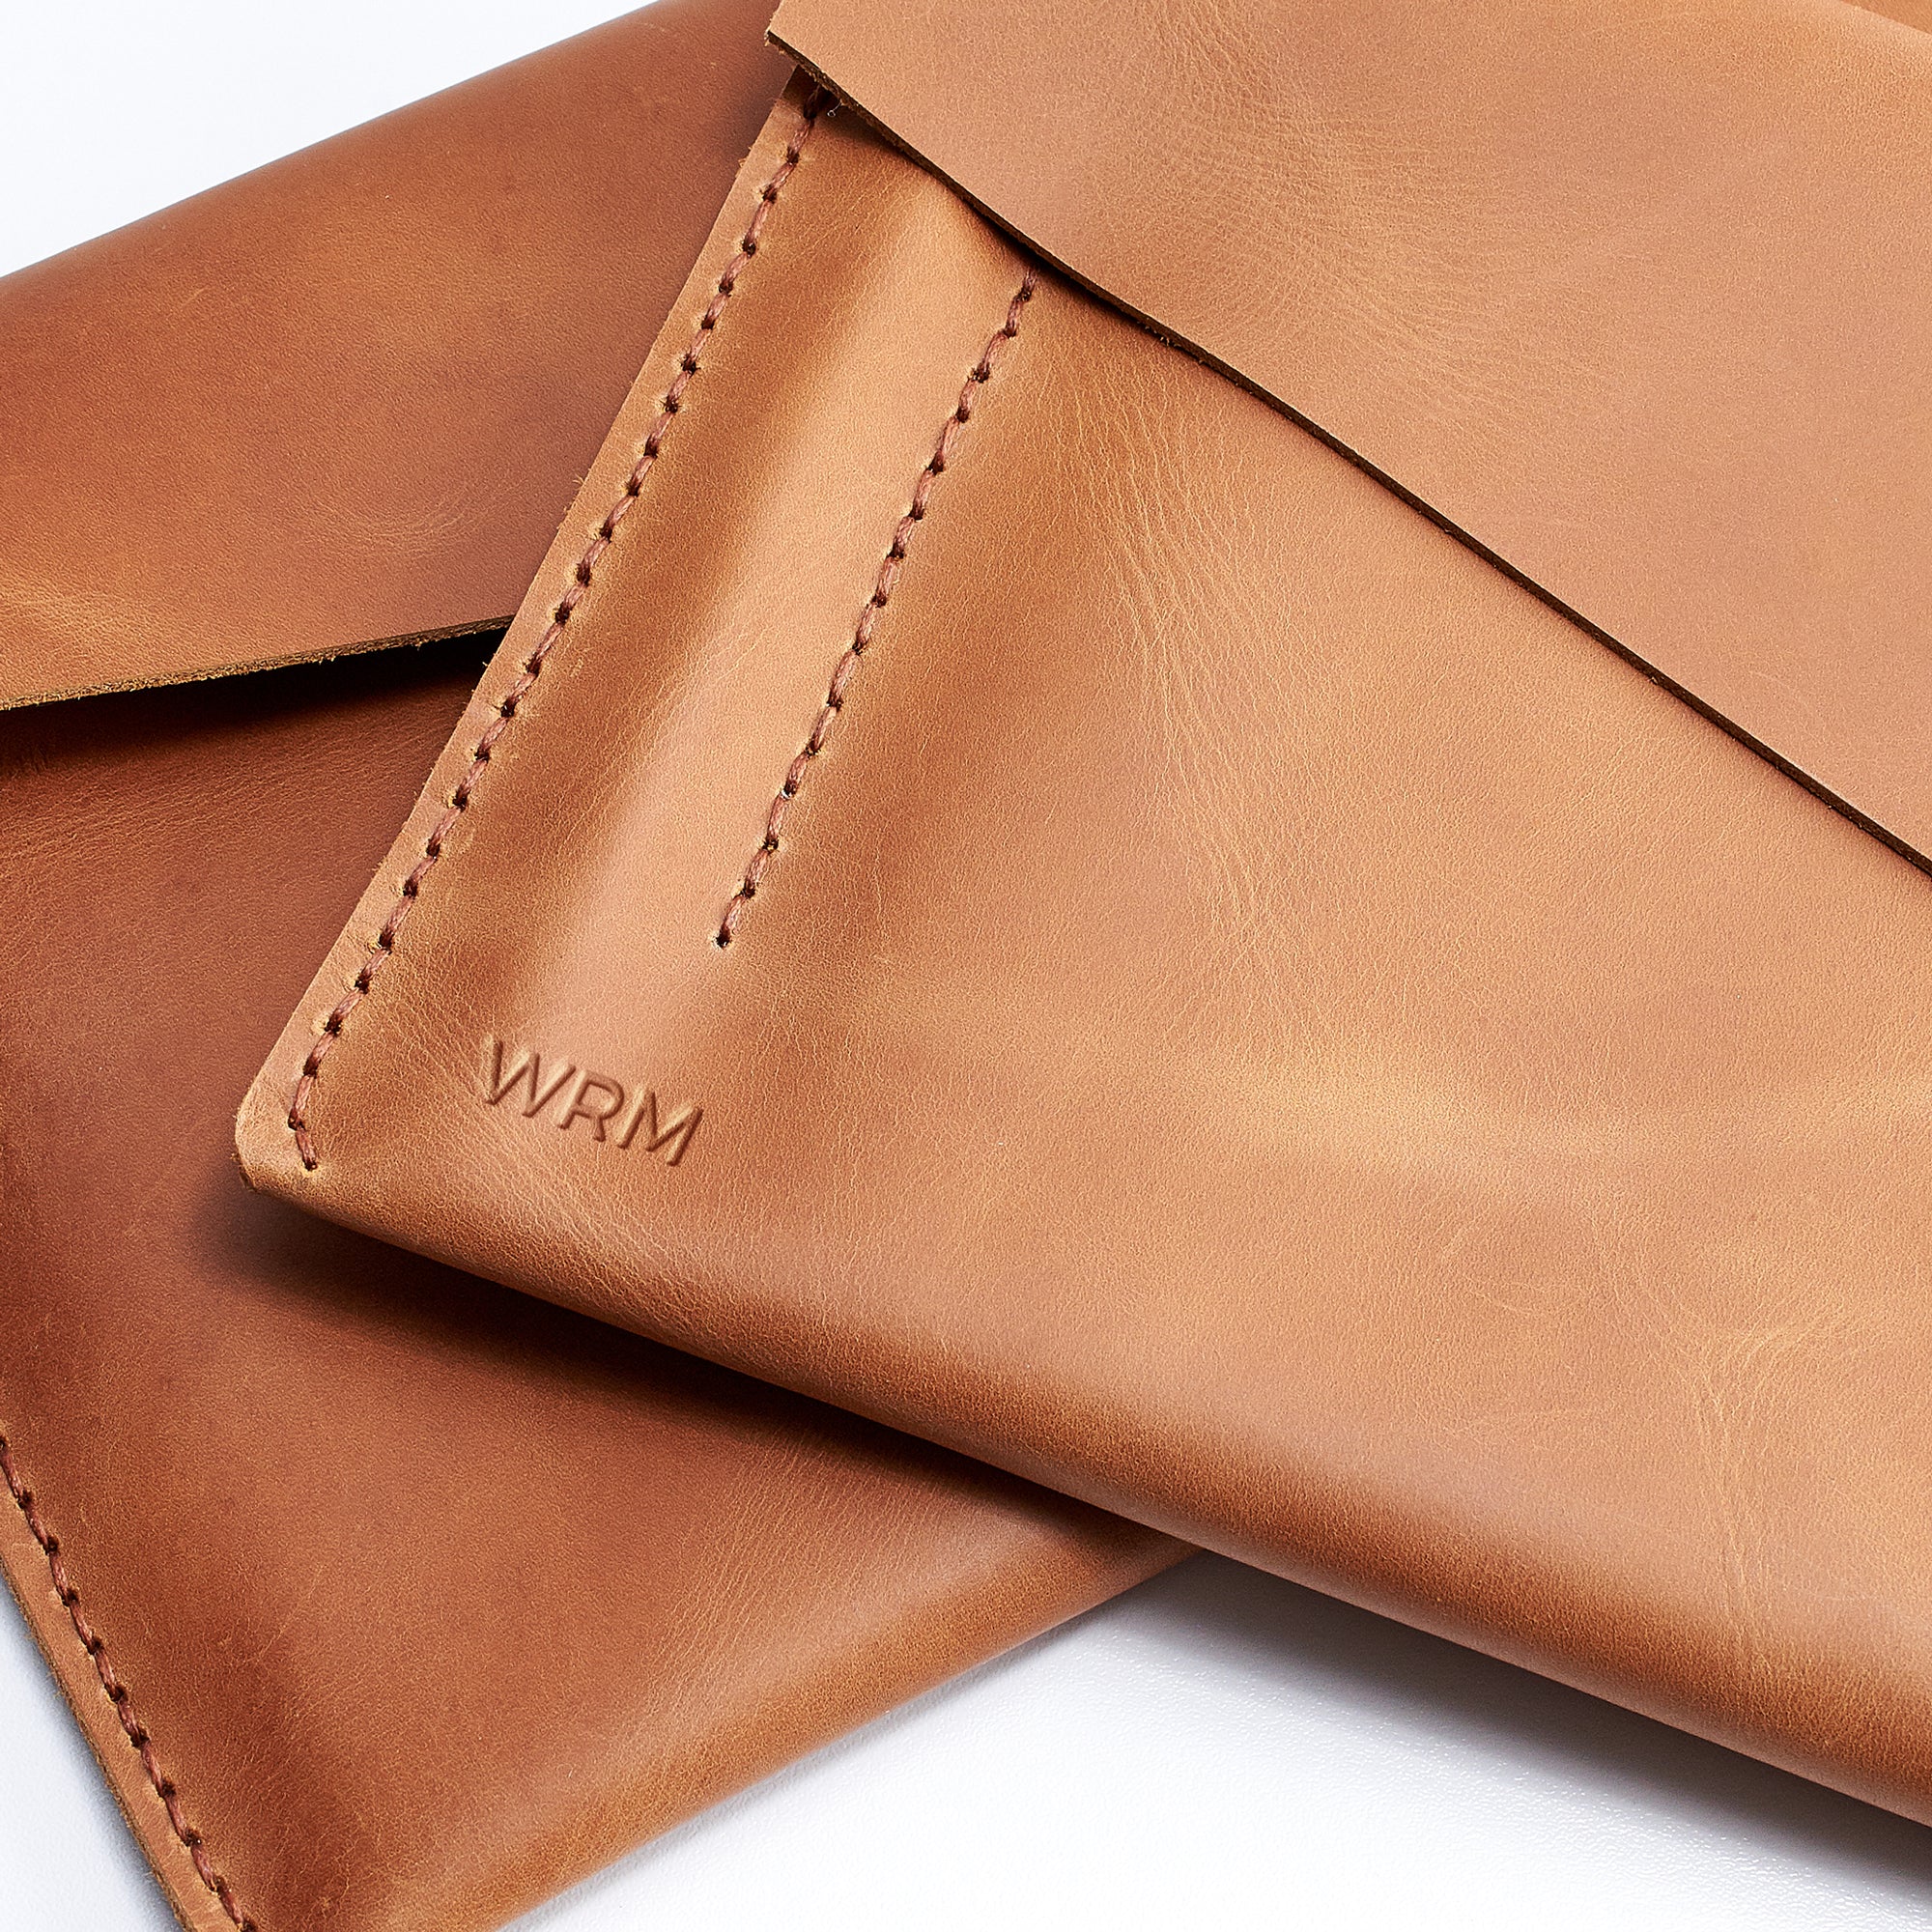 Custom Embossing. iPad Sleeve. iPad Leather Case Tan With Apple Pencil Holder by Capra Leather